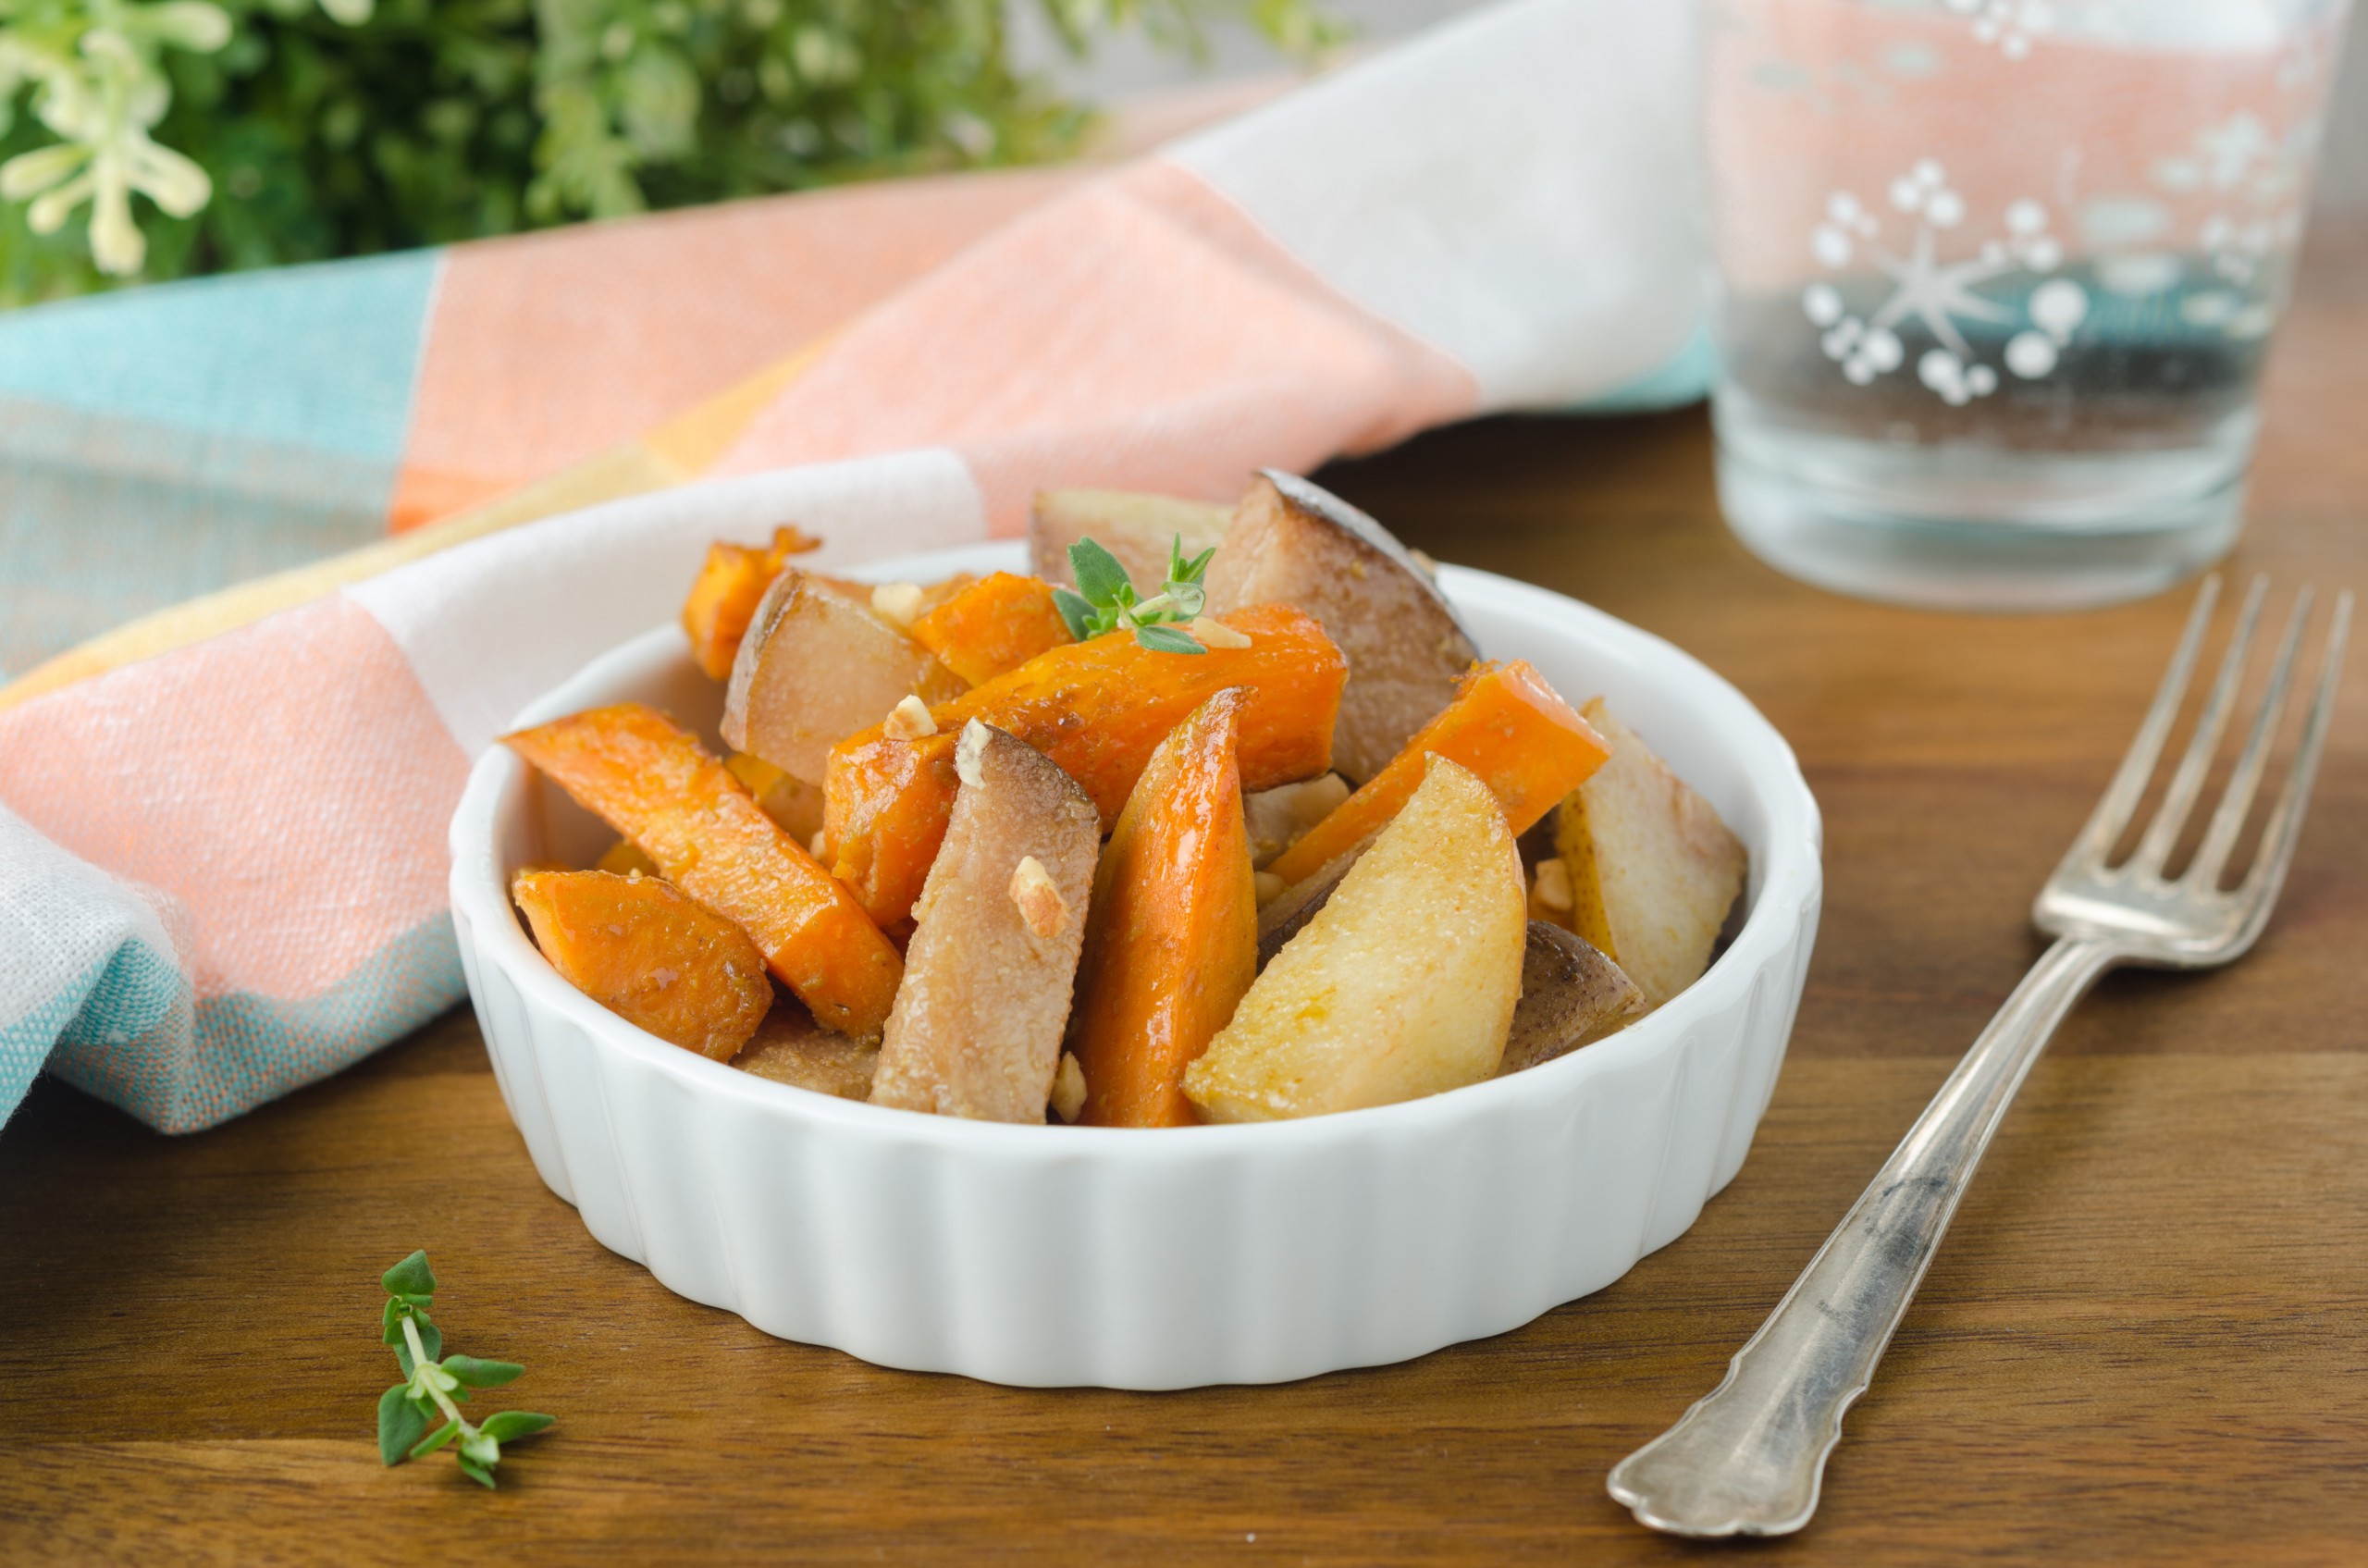 Roasted Sweet Potato and Pears